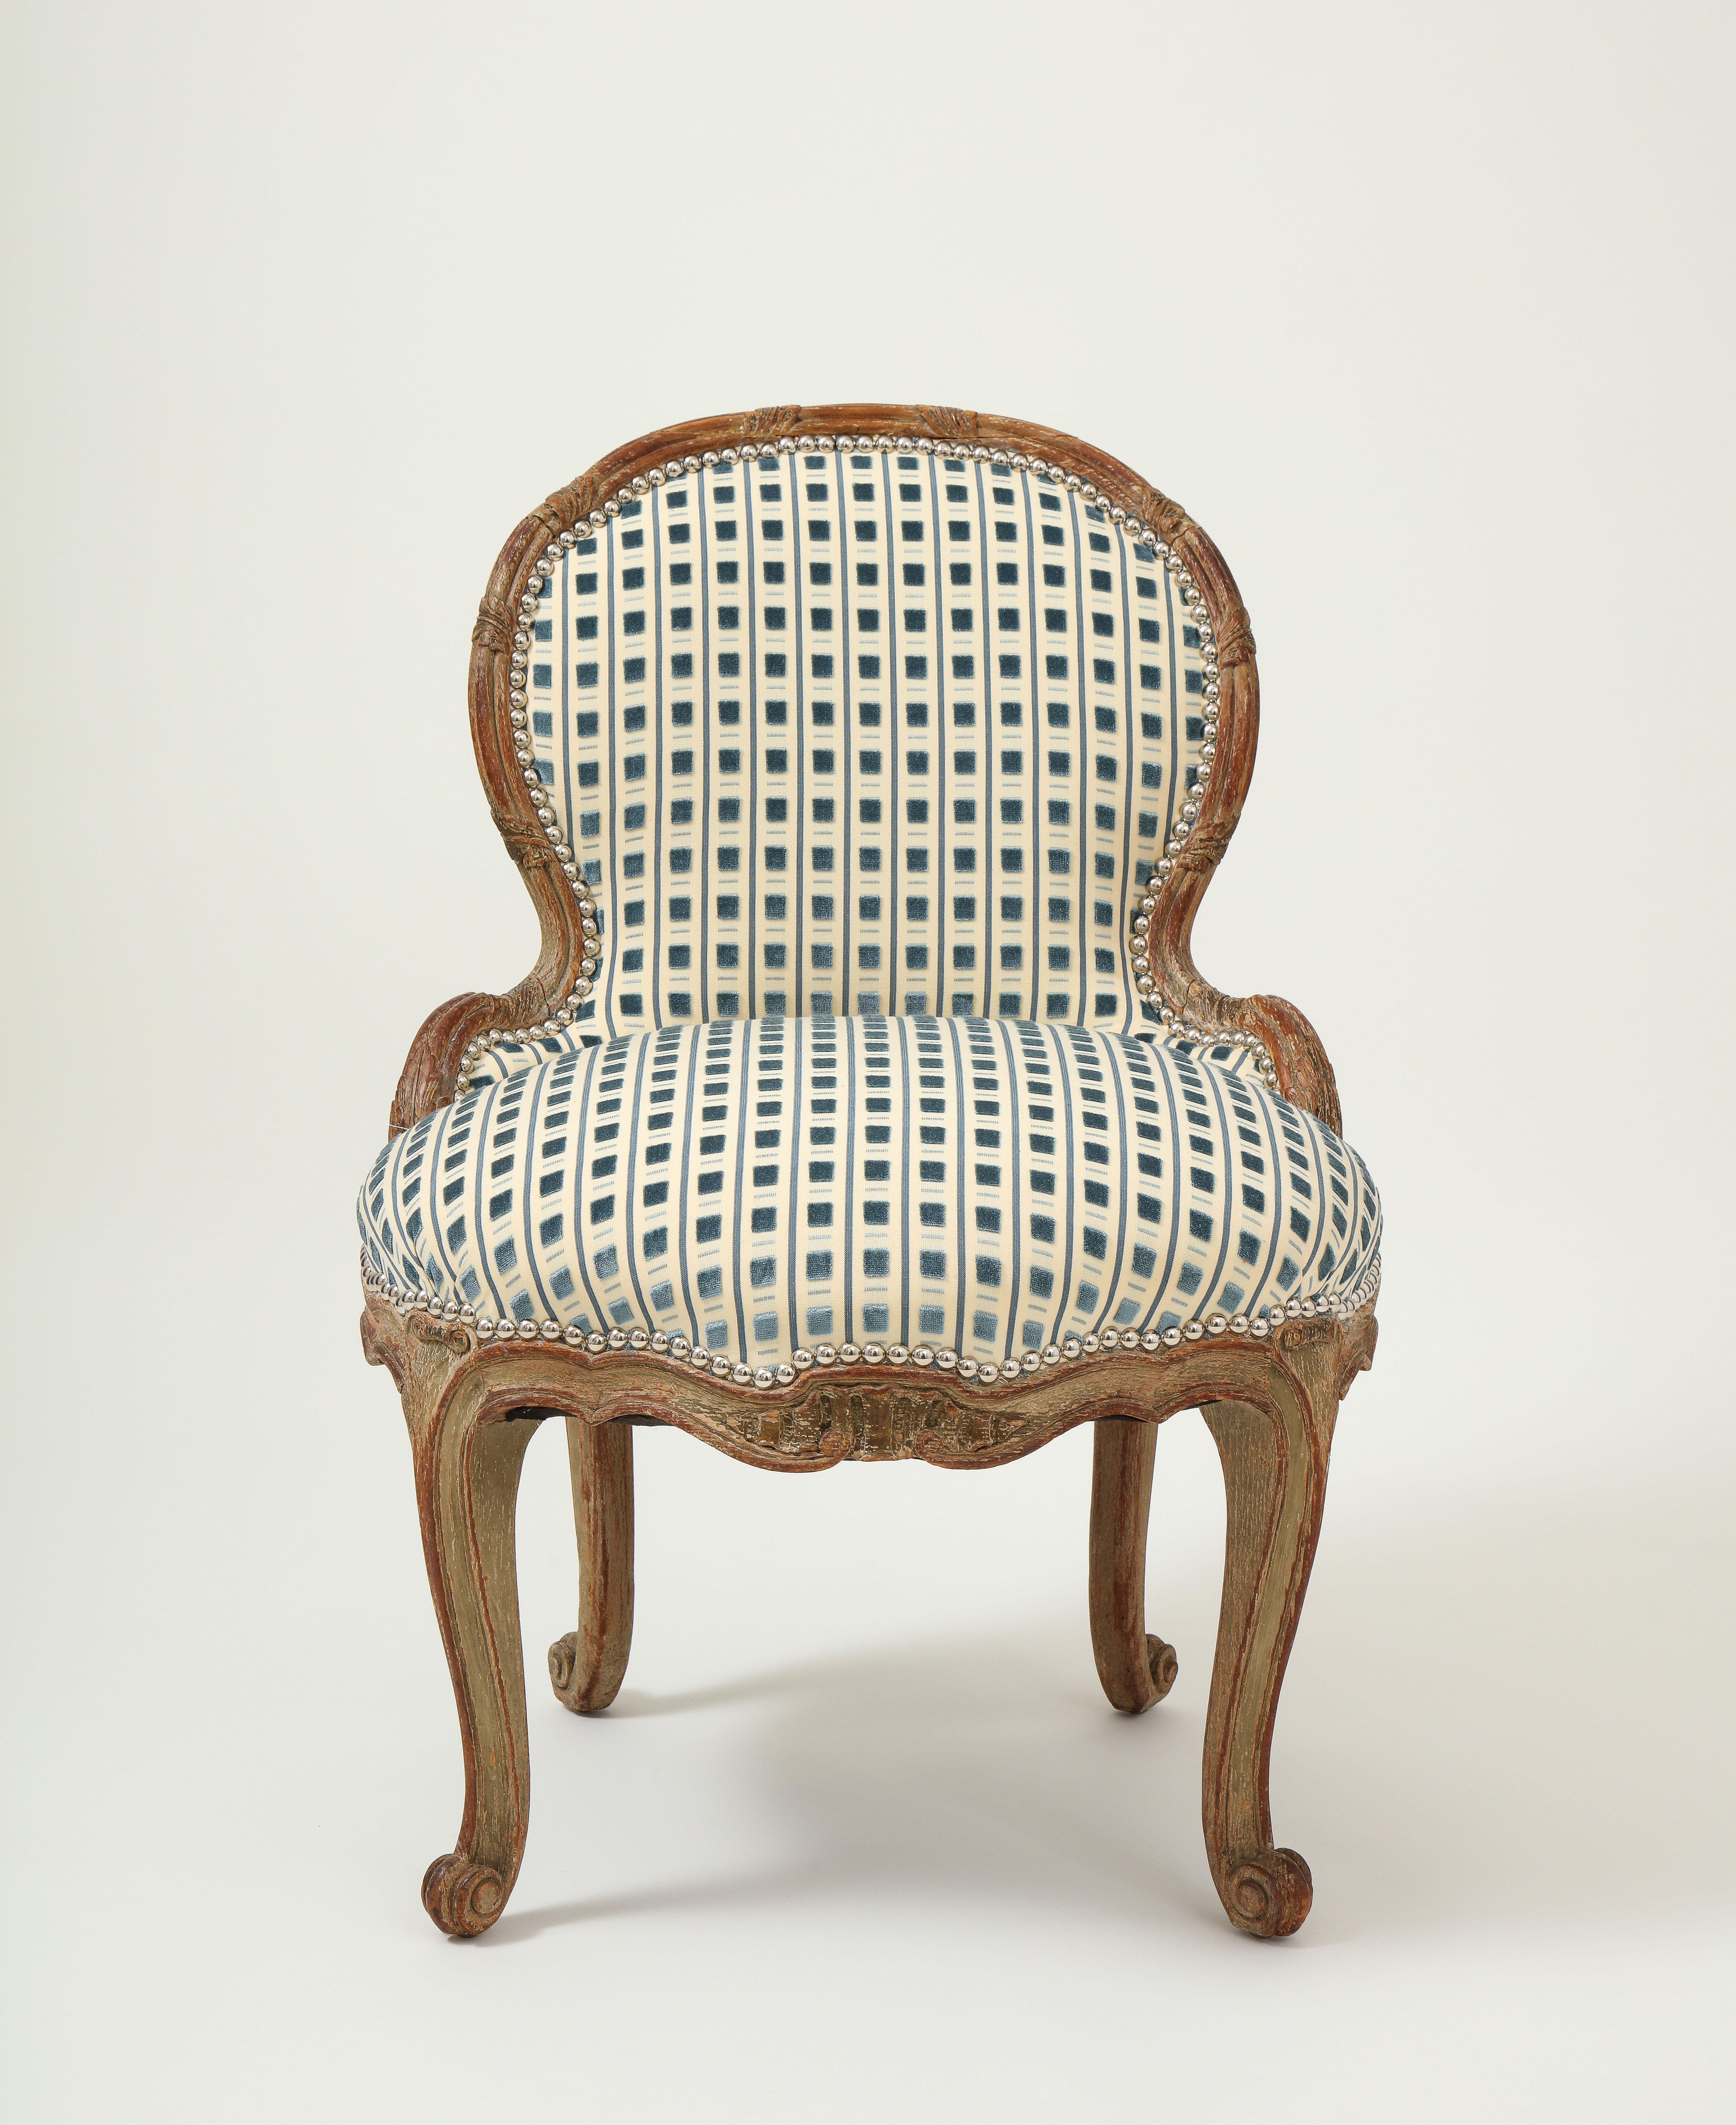 The rounded back reeded with carved foliate clasps; raised on channeled cabriole legs terminating in scroll form feet. Newly upholstered in a Clarence House cut velvet with silvered nail head trim.

Note this is a smaller scale piece, making it